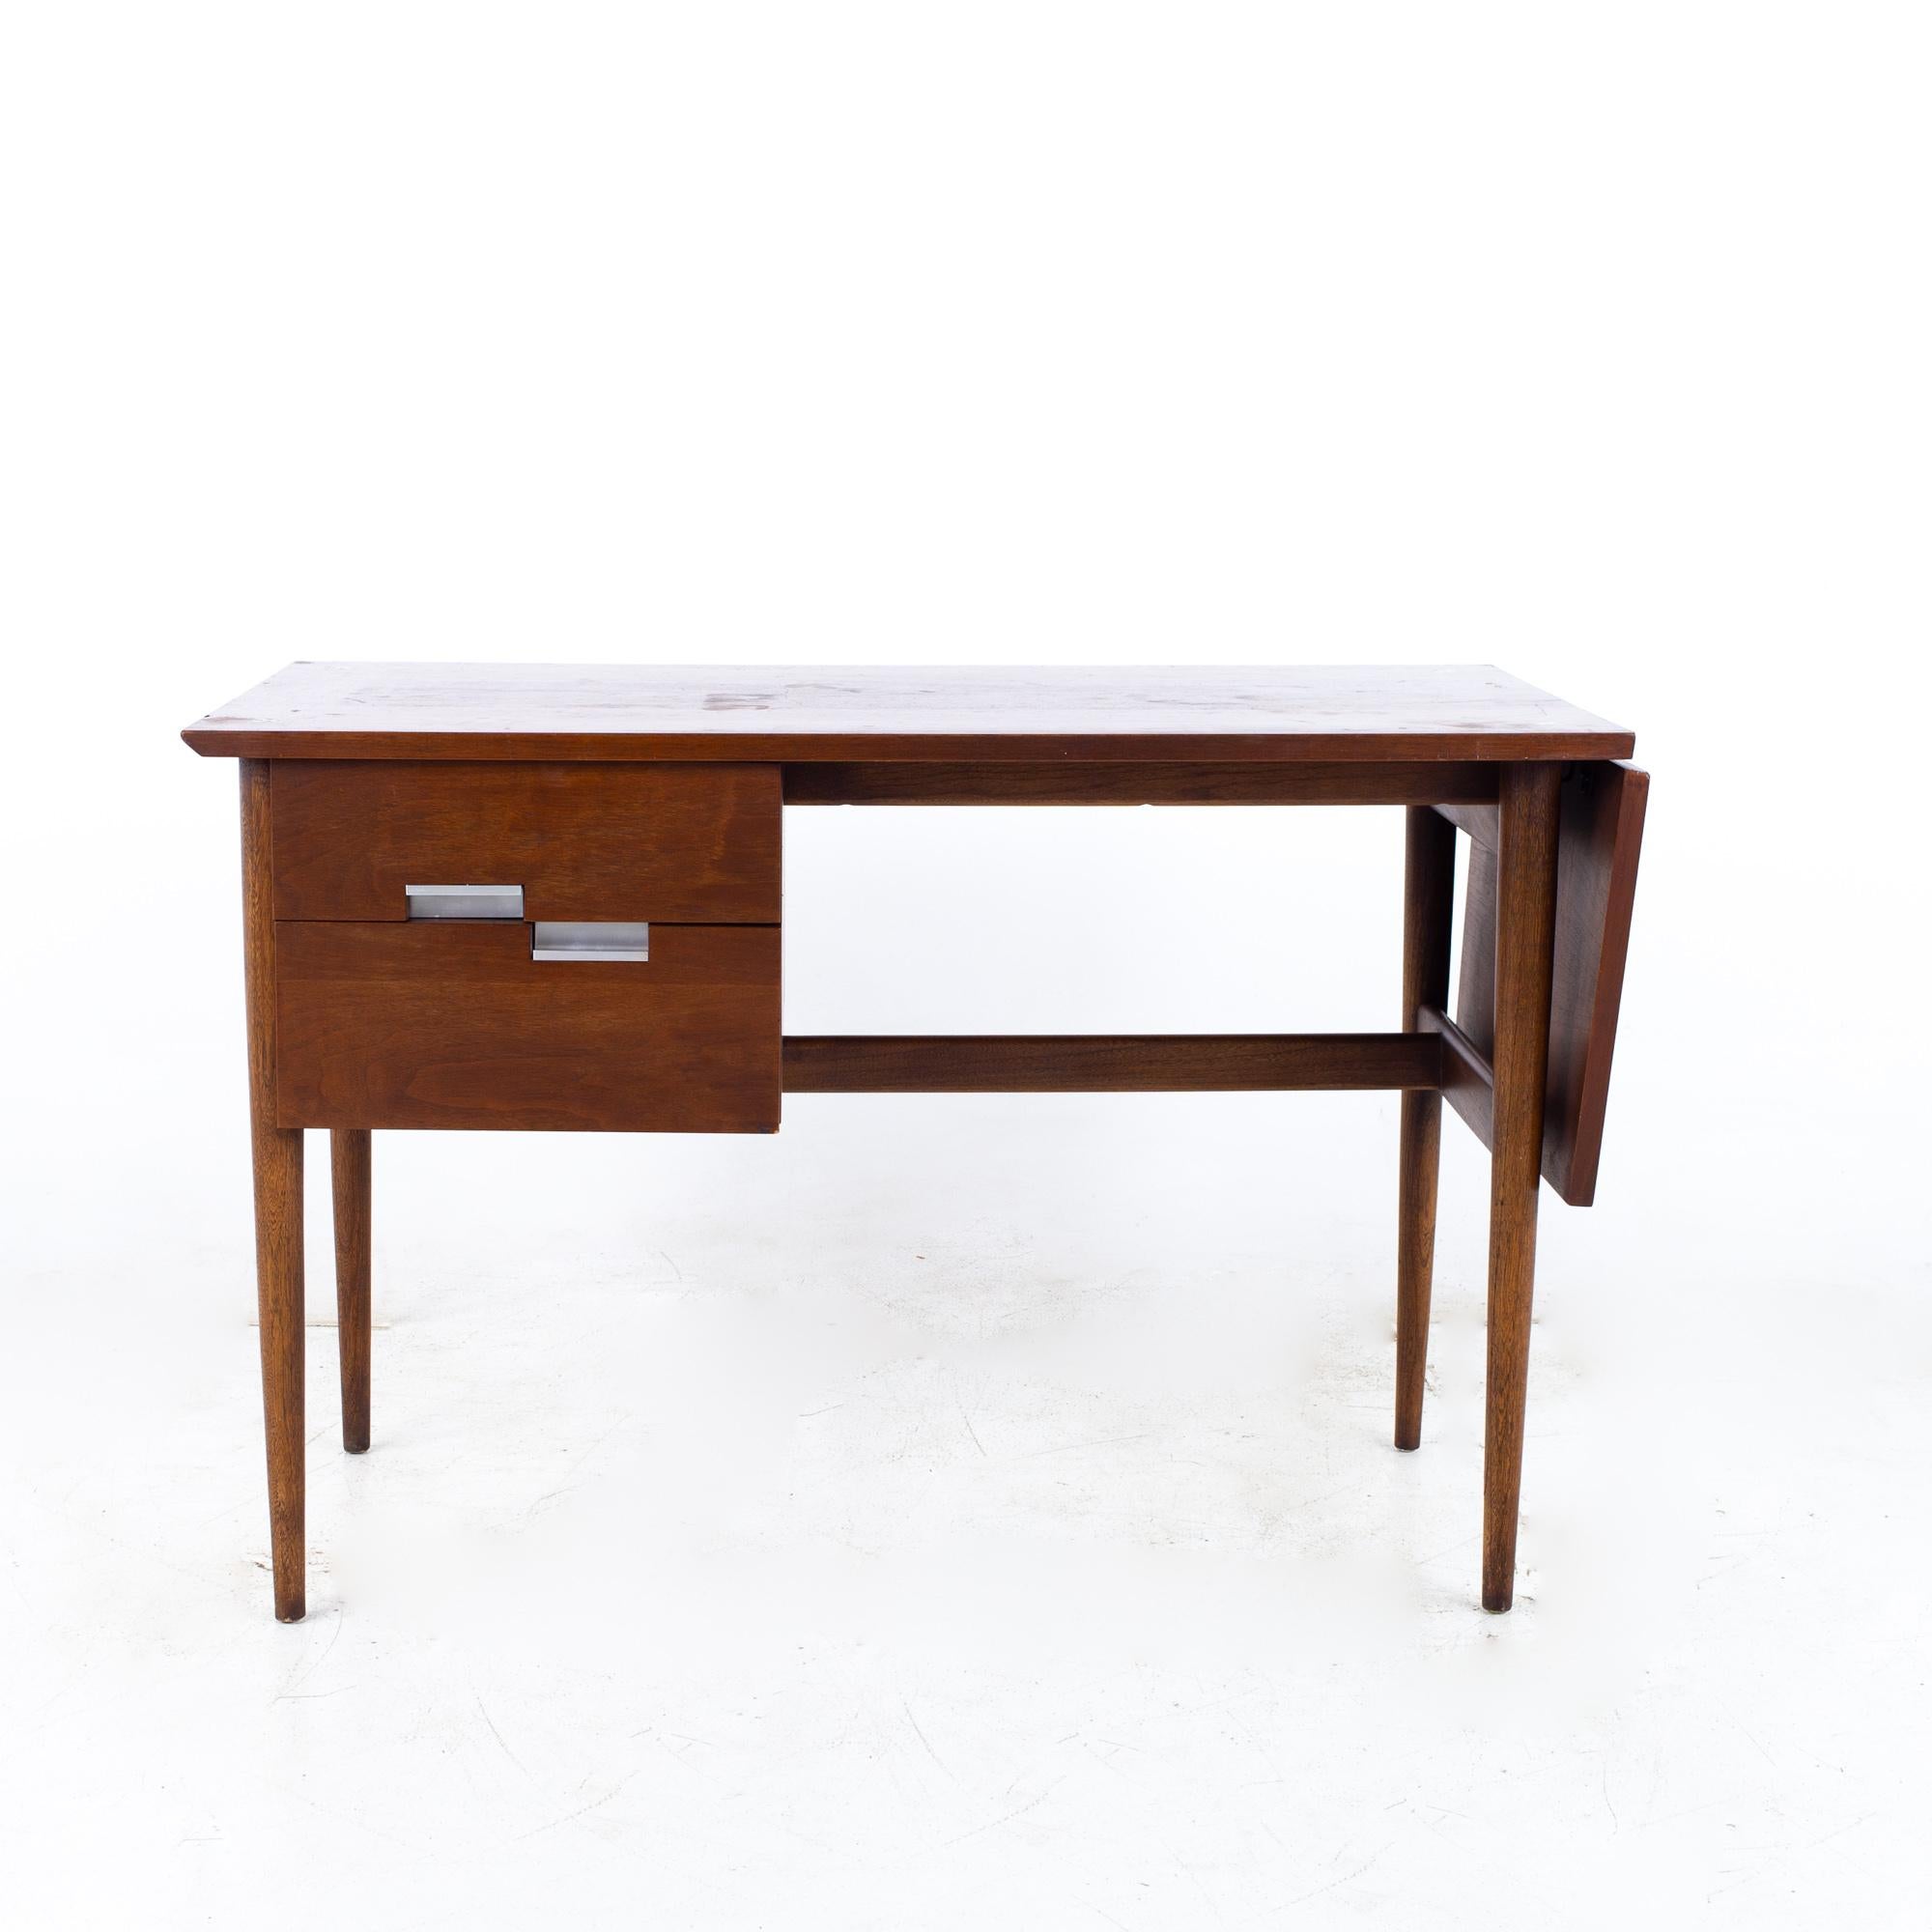 Merton Gershun for American of Martinsville mid century walnut dropleaf desk

Desk measures: 44.5 wide x 23 deep x 29.5 inches high, with a chair clearance of 26.25 inches; when expanded the desk is 58 inches wide

?All pieces of furniture can